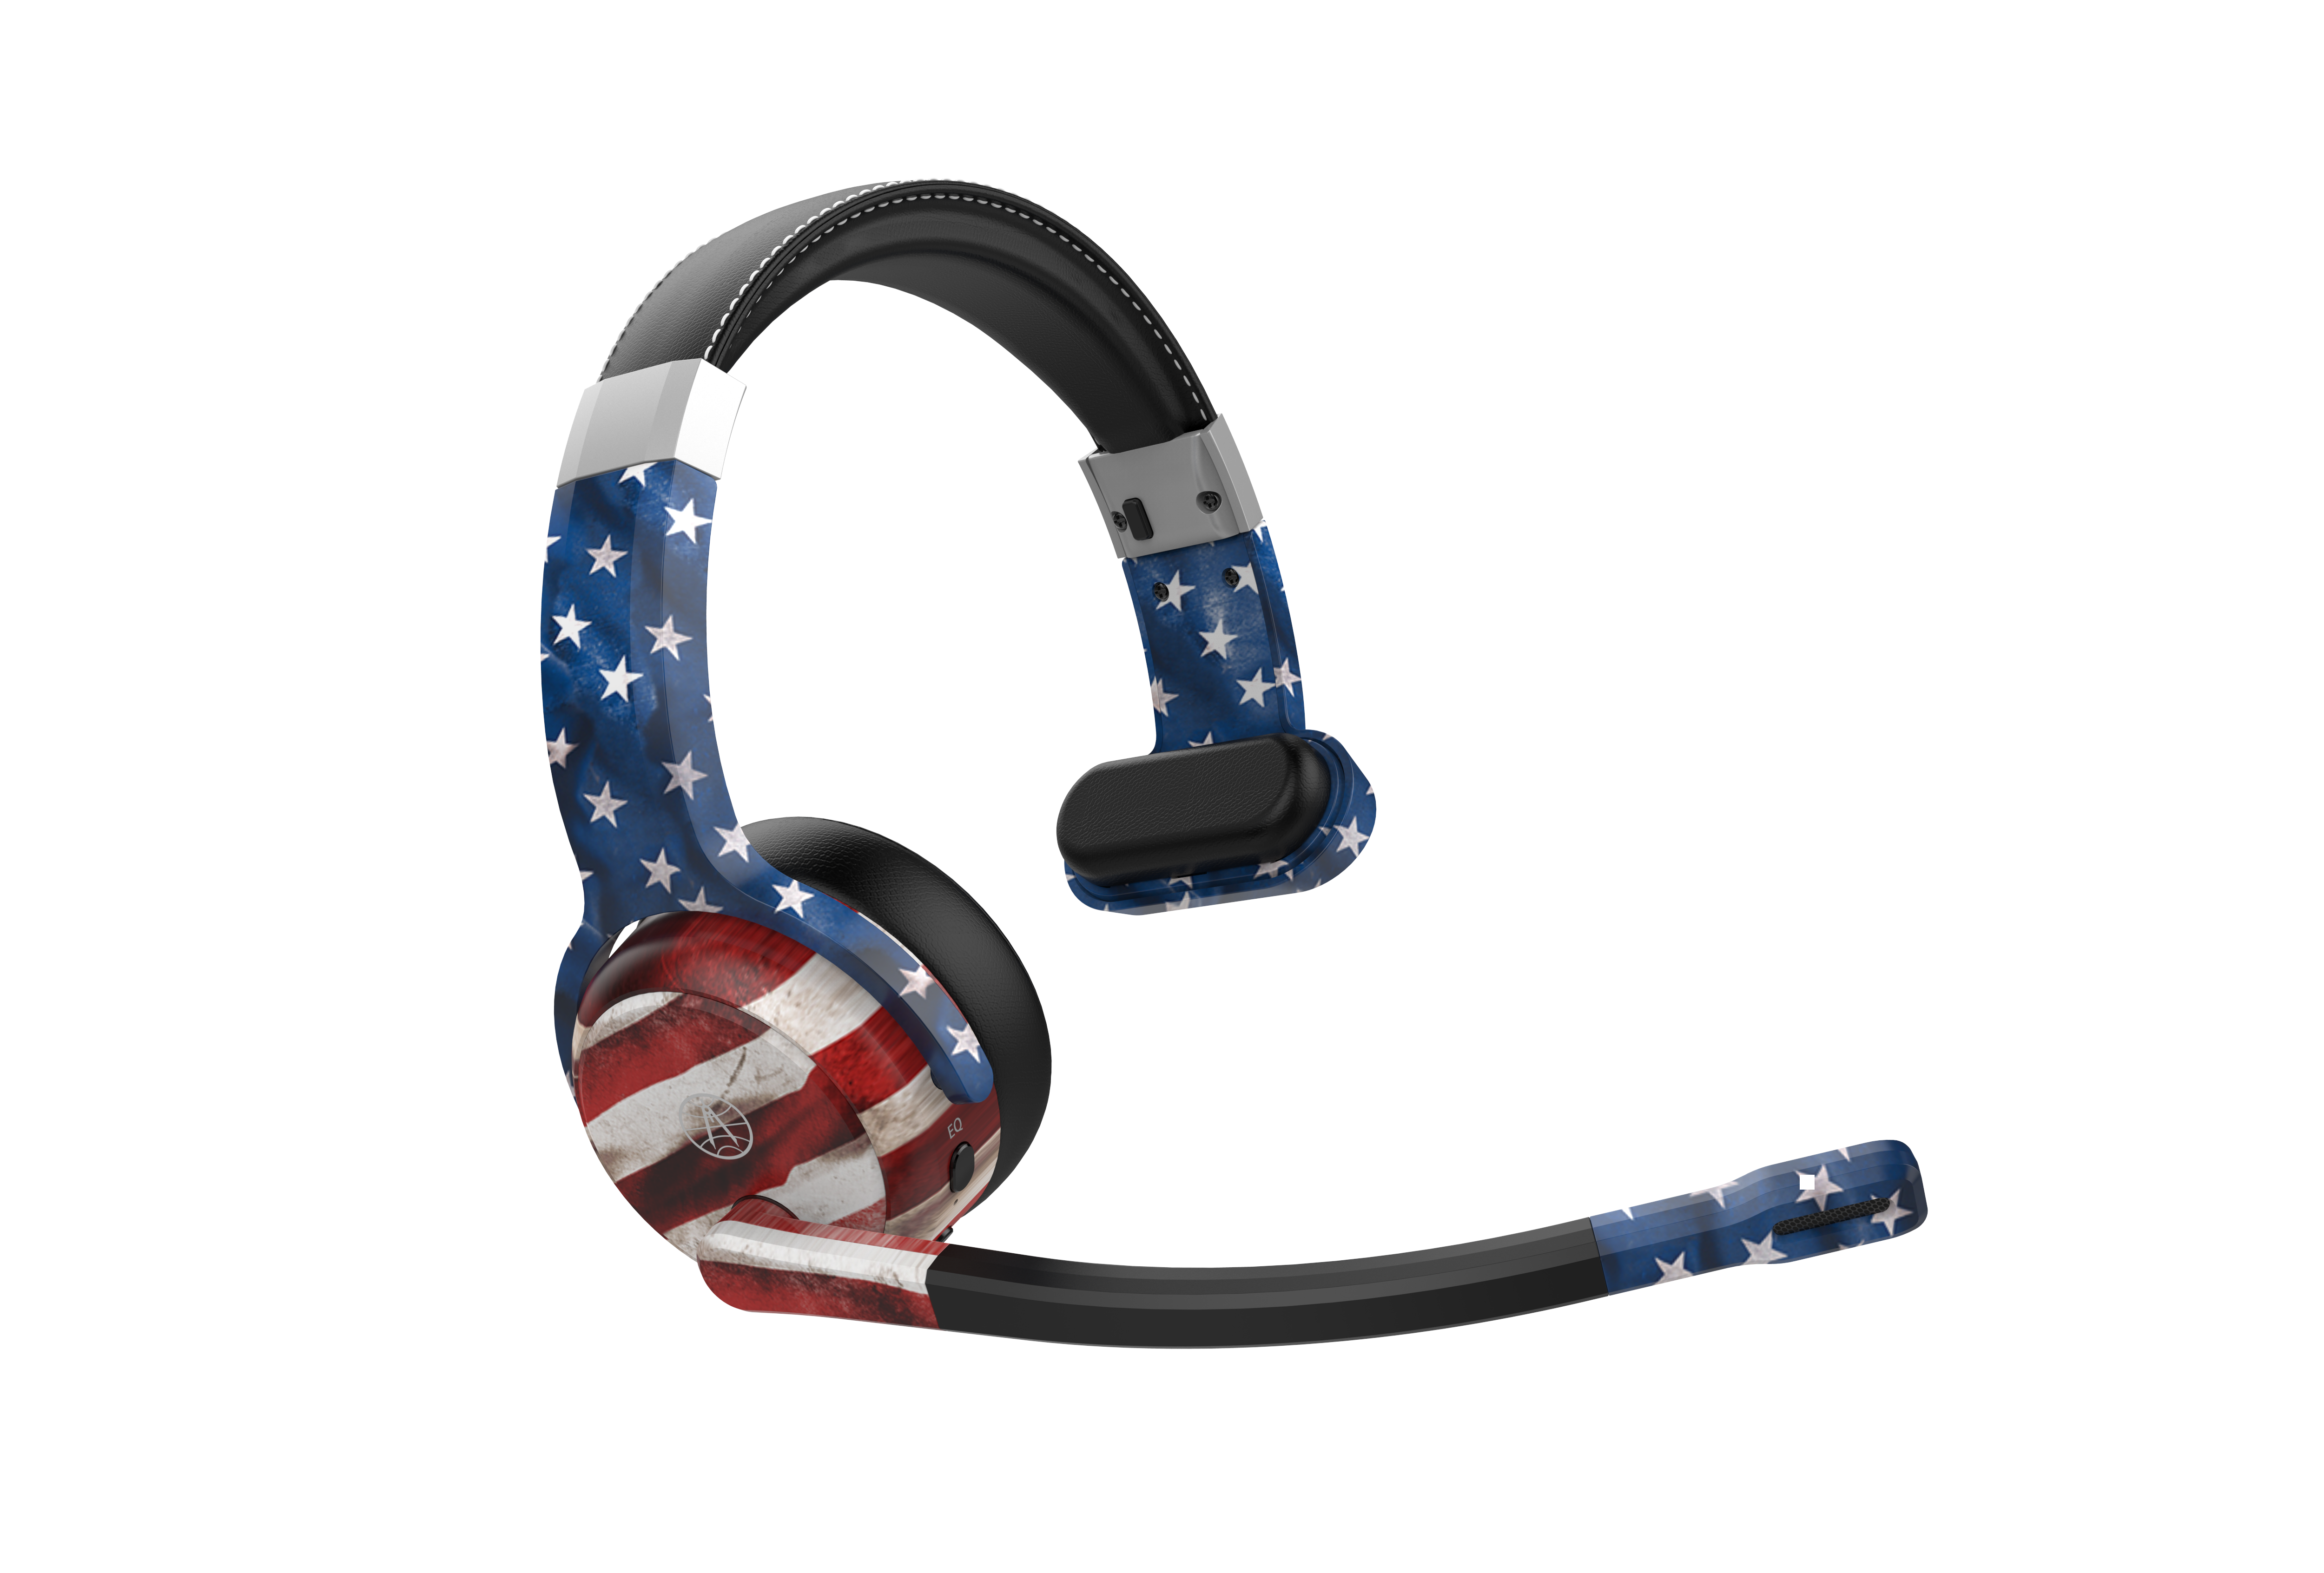 ClearDryve 100 SE Stars and Stripes Headset